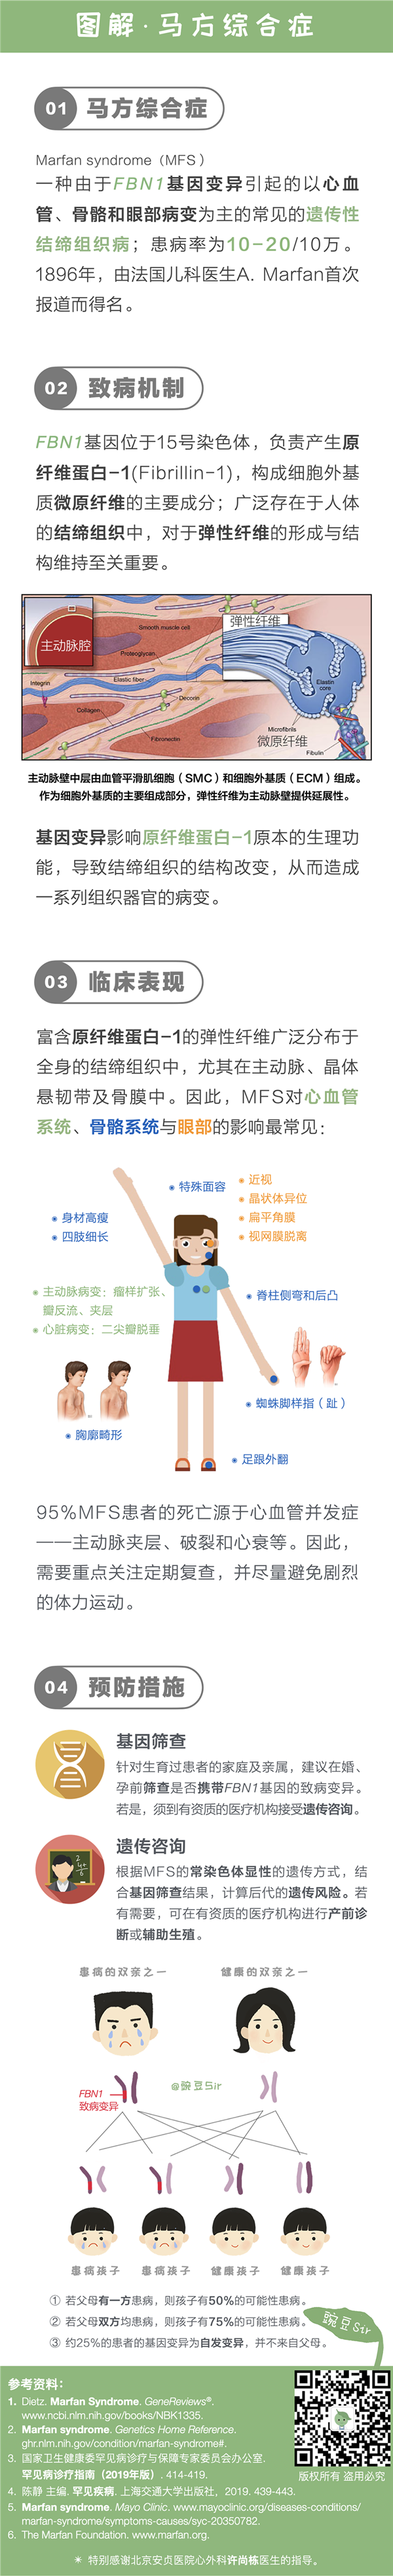 2.Marfan Syndrome_图解疾病.png